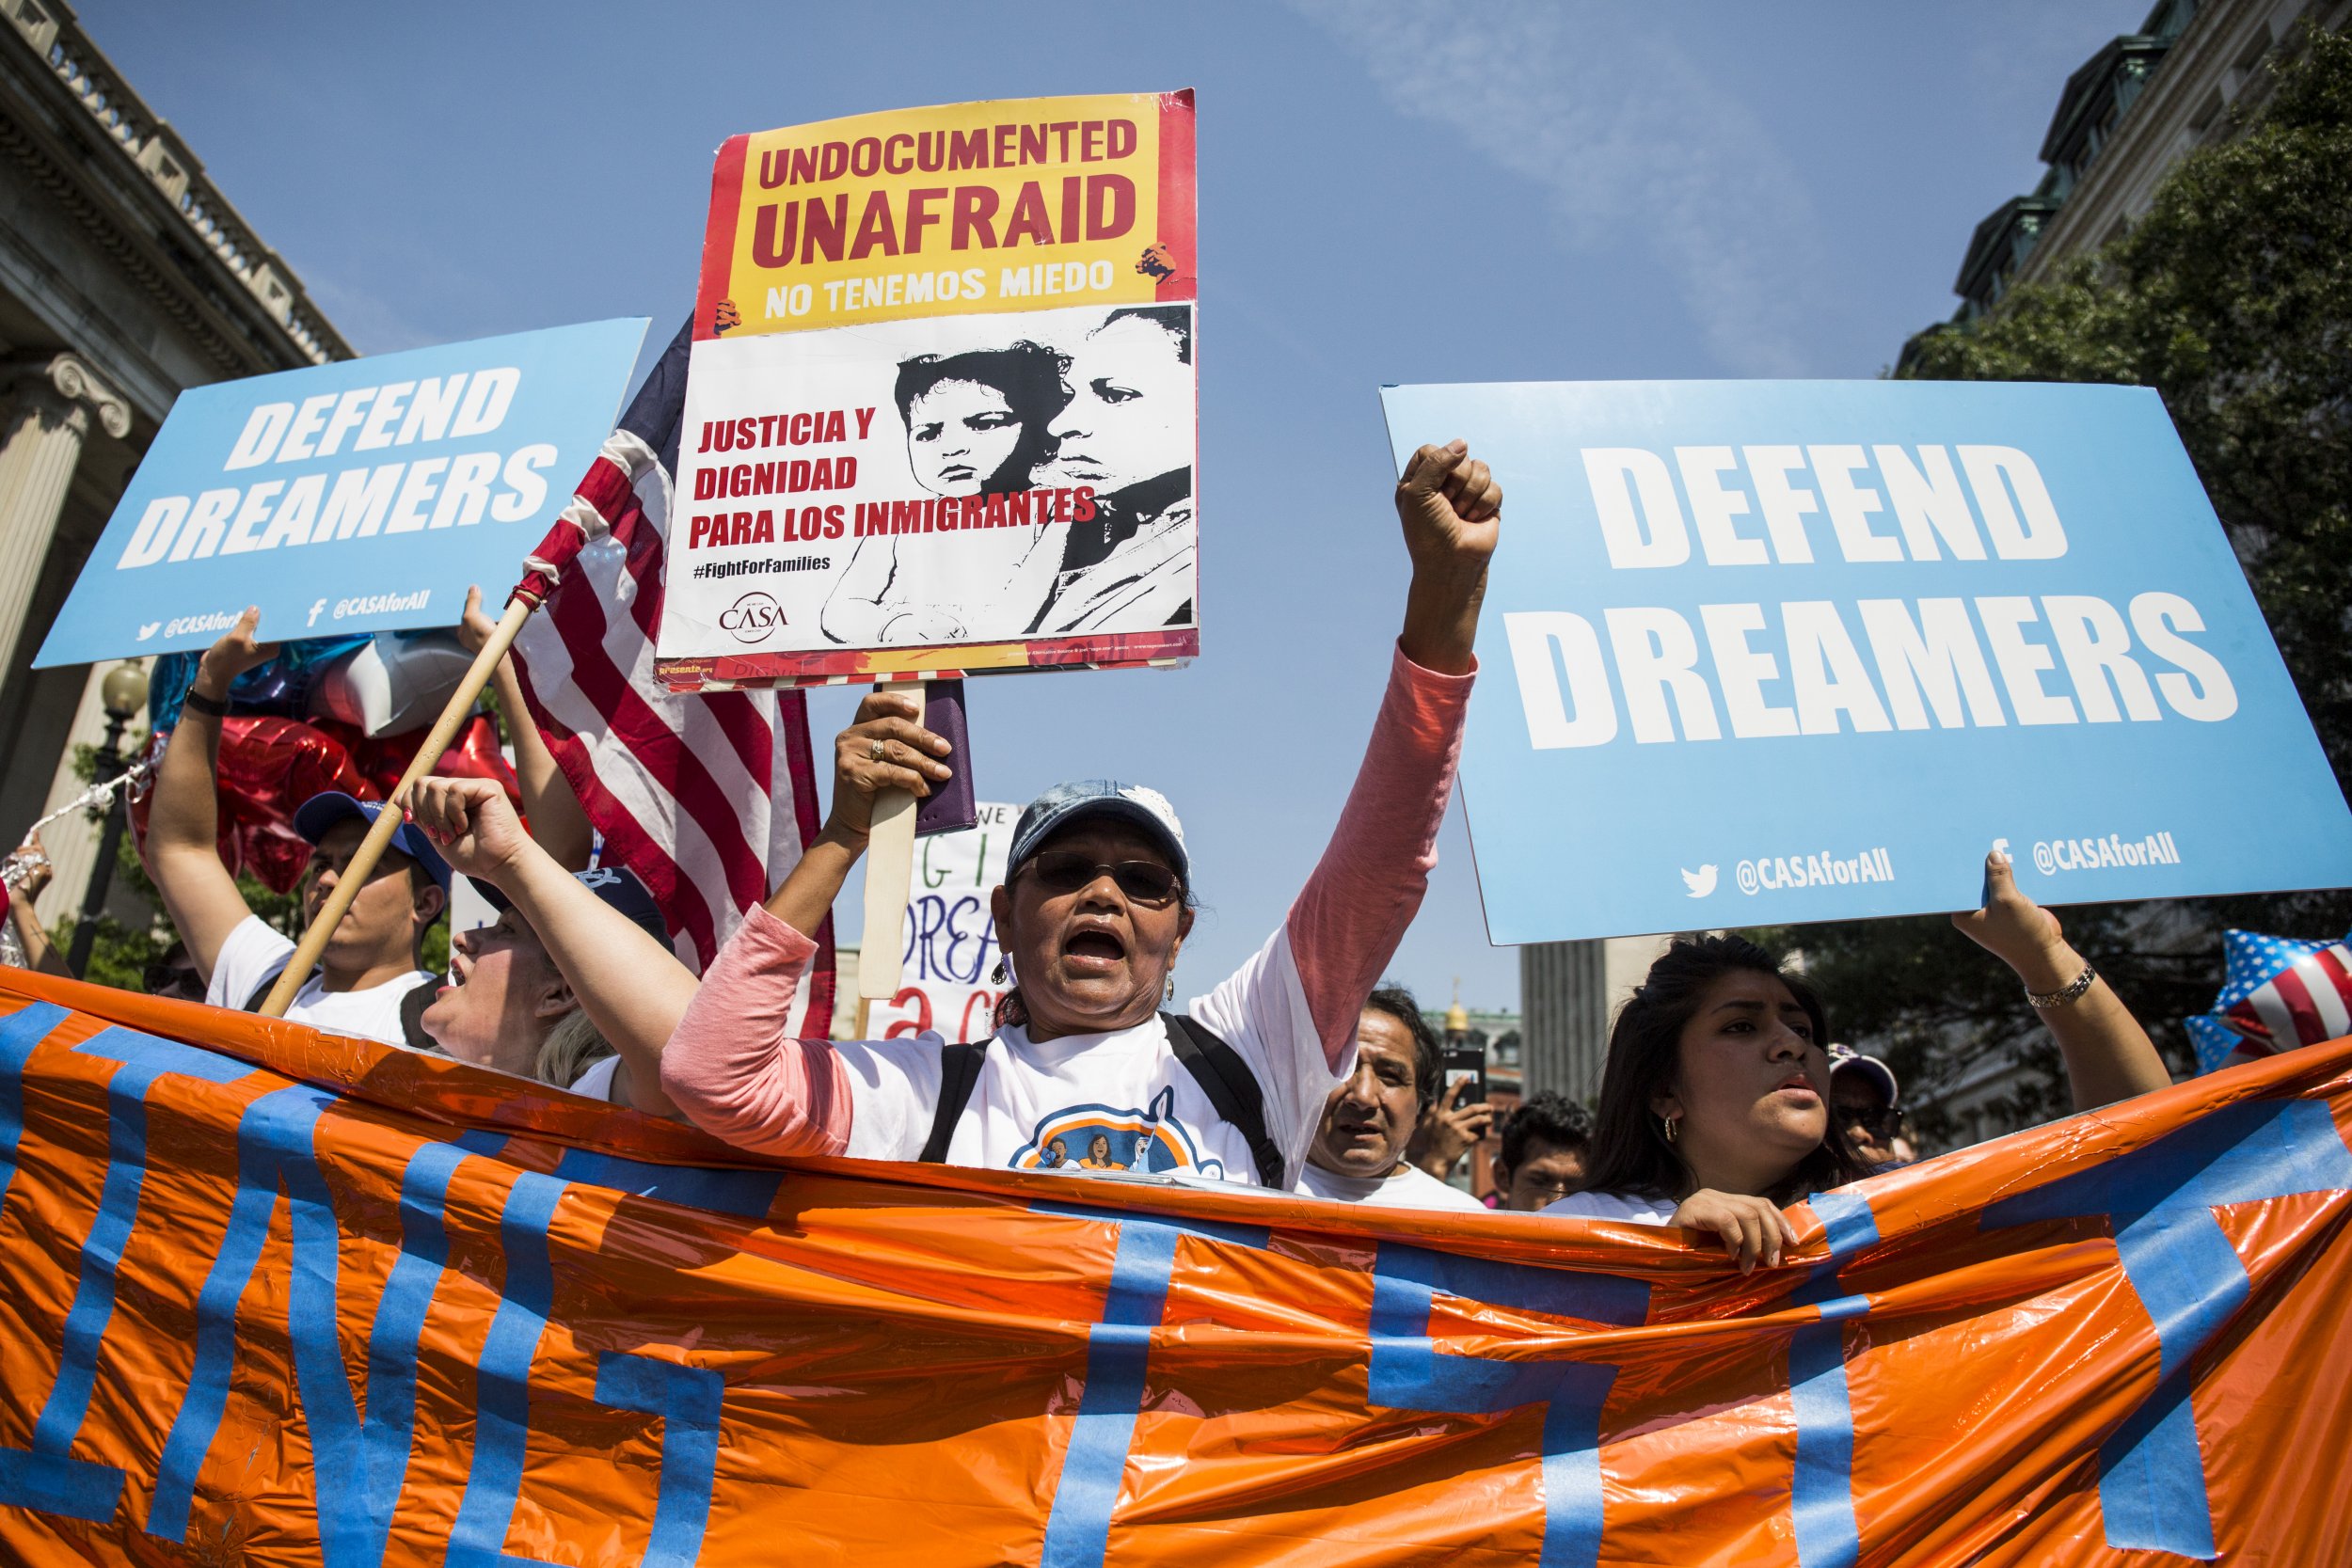 Trump's Immigration Policies Have Made Dreamers Too Afraid to Renew